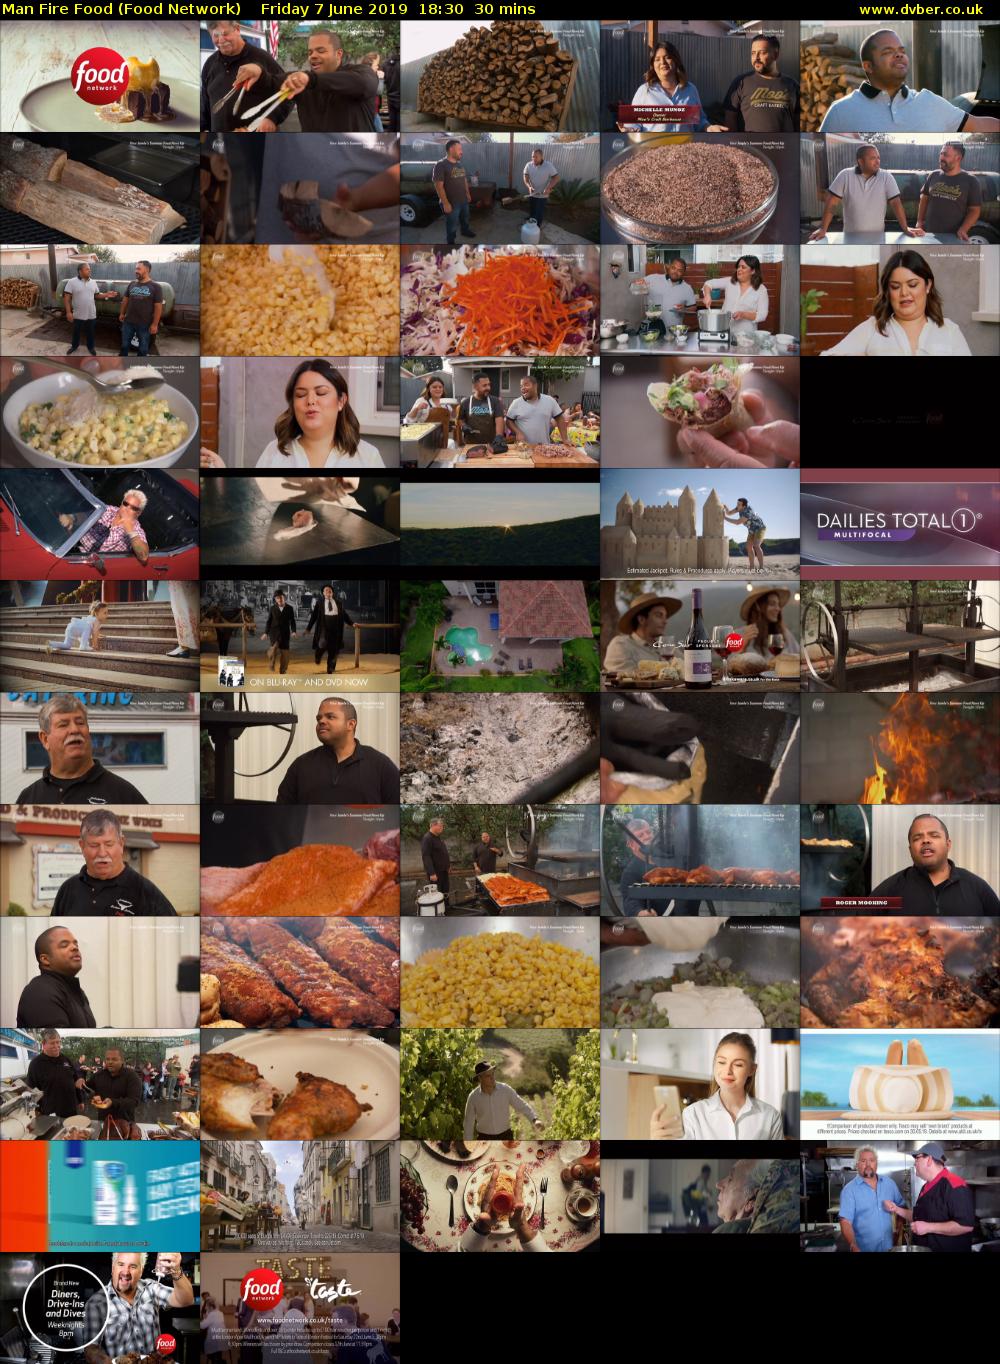 Man Fire Food (Food Network) Friday 7 June 2019 18:30 - 19:00